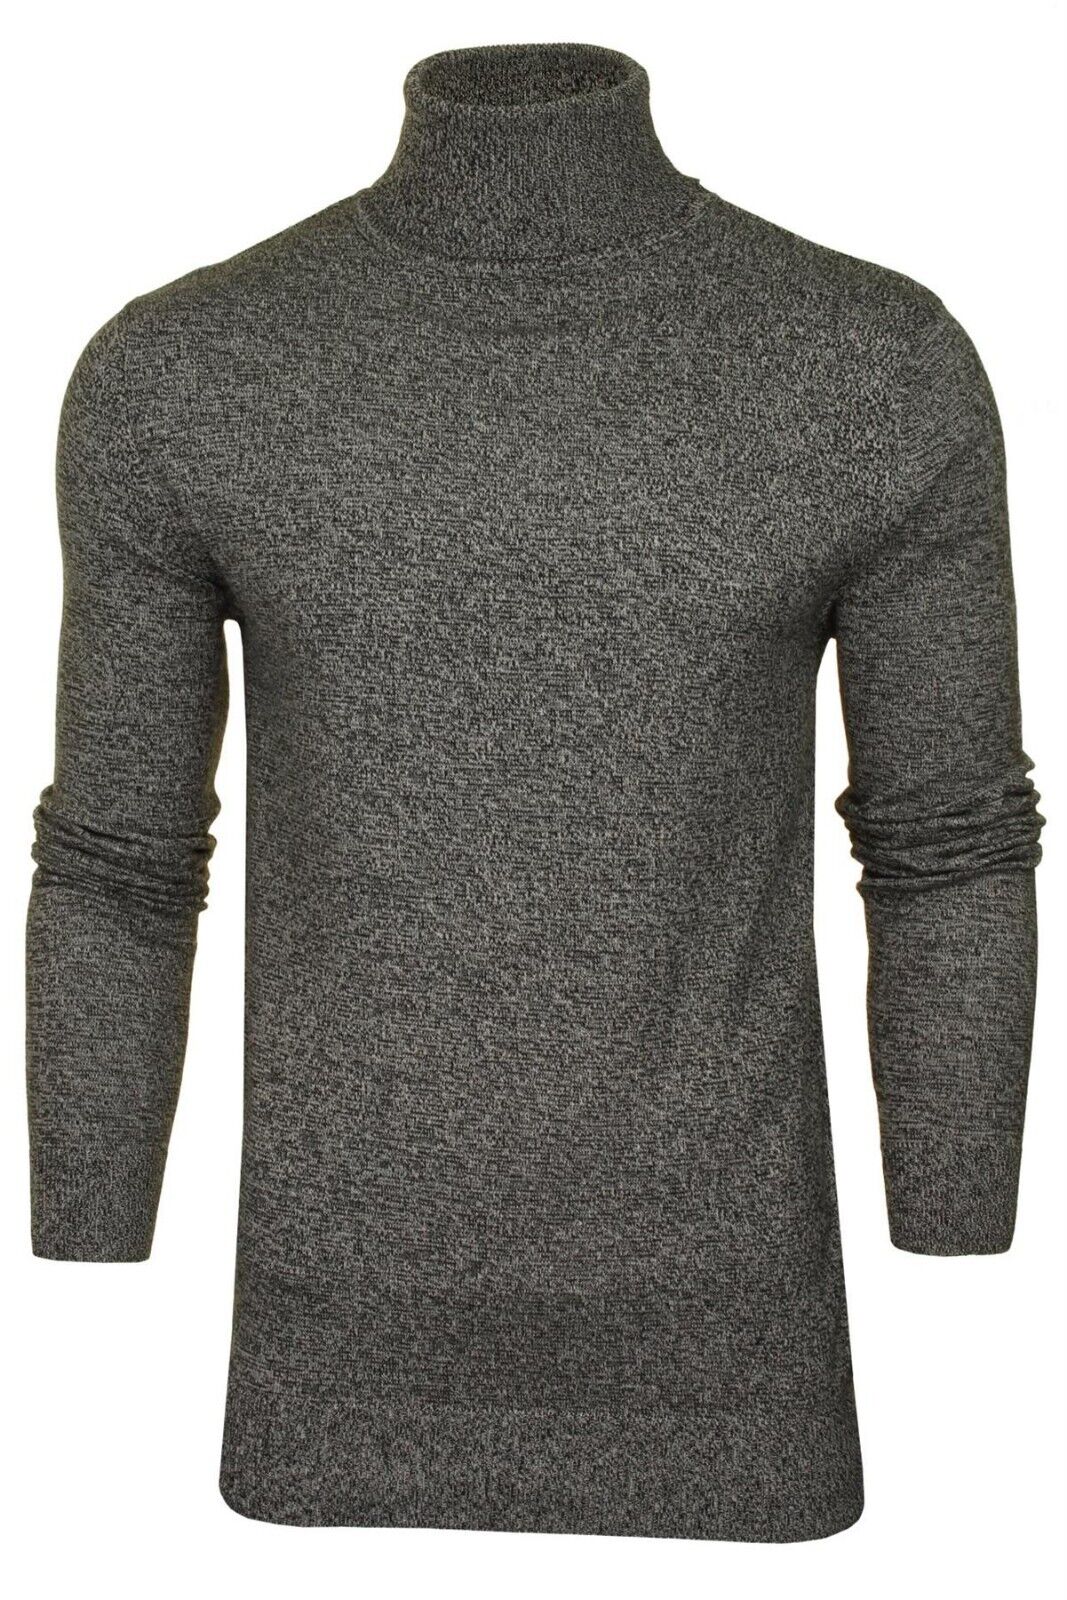 Mens Turtle Neck Jumper by Brave Soul Knitted Long Sleeve Roll Sweater Pullover